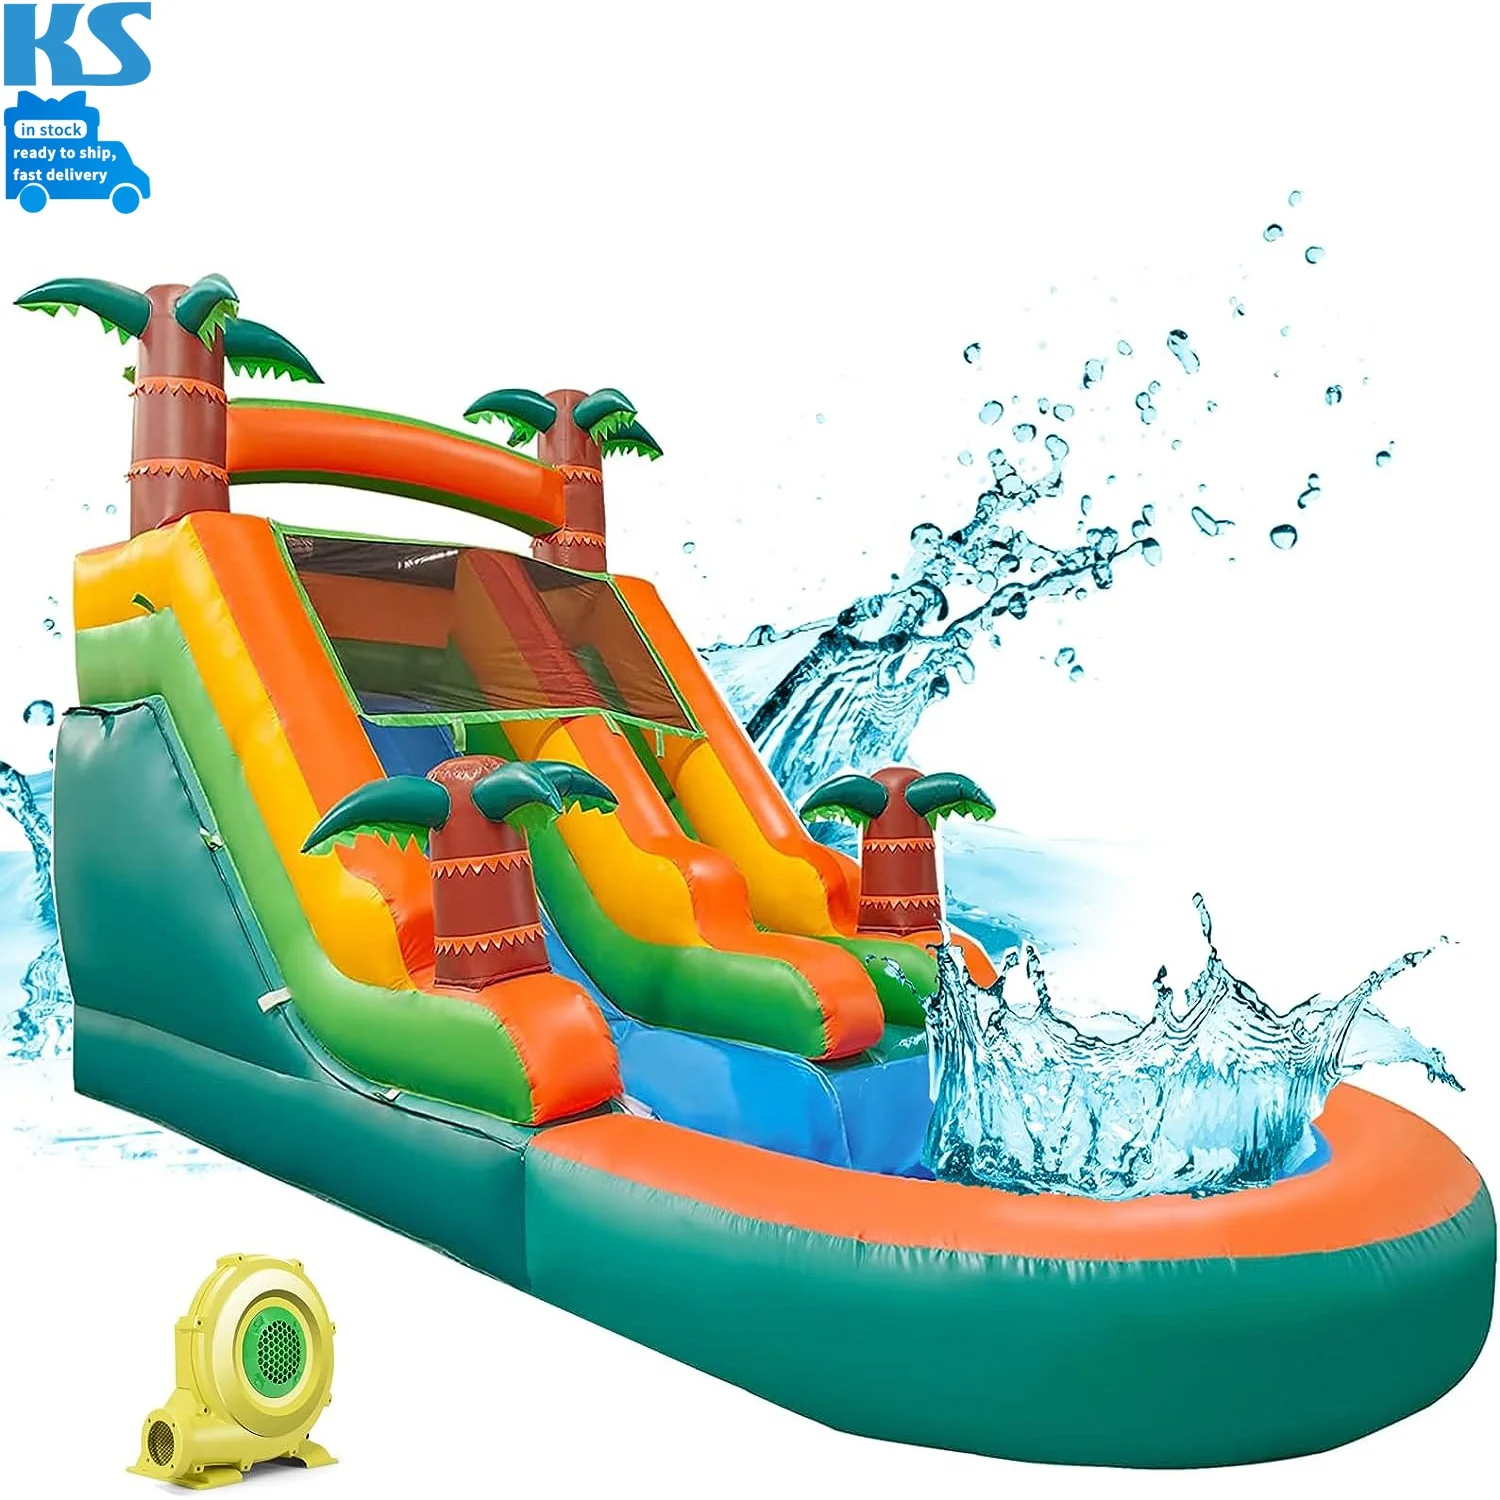 

Outdoor home backyard 21ft inflatable bounce house water slide for kids inflatable bouncer with water slide Splash Pool